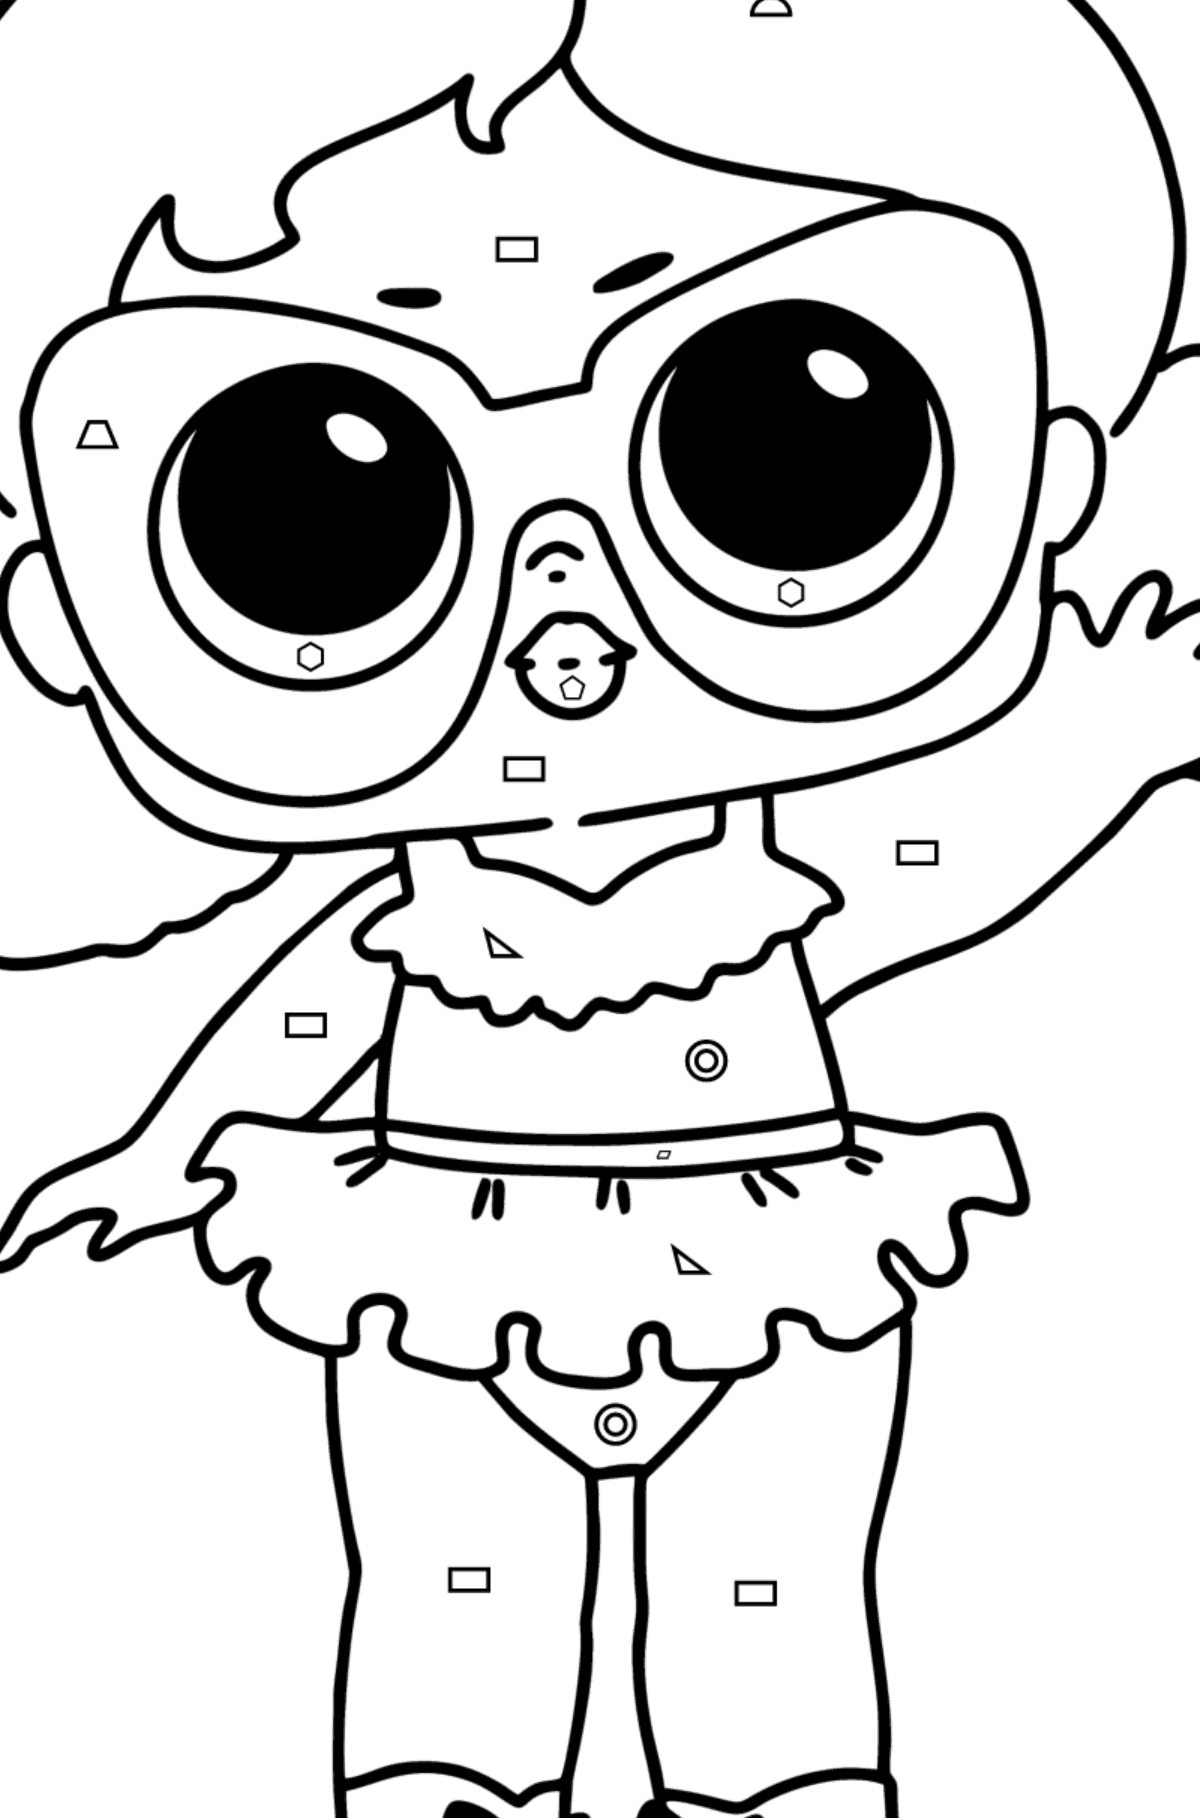 LOL Surprise Vacay babay coloring page - Coloring by Geometric Shapes for Kids